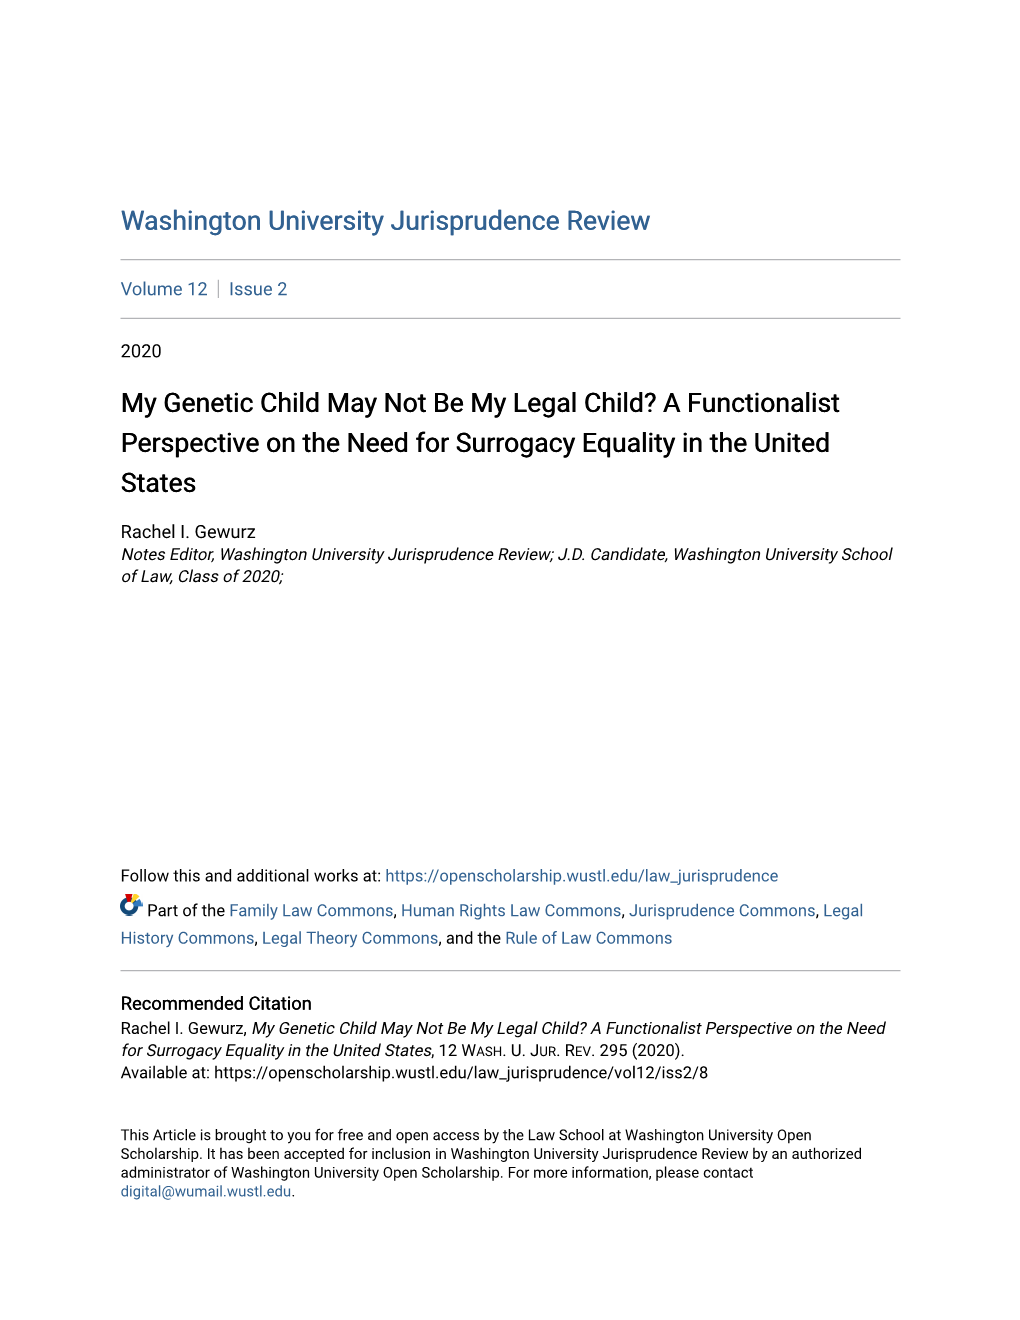 My Genetic Child May Not Be My Legal Child? a Functionalist Perspective on the Need for Surrogacy Equality in the United States